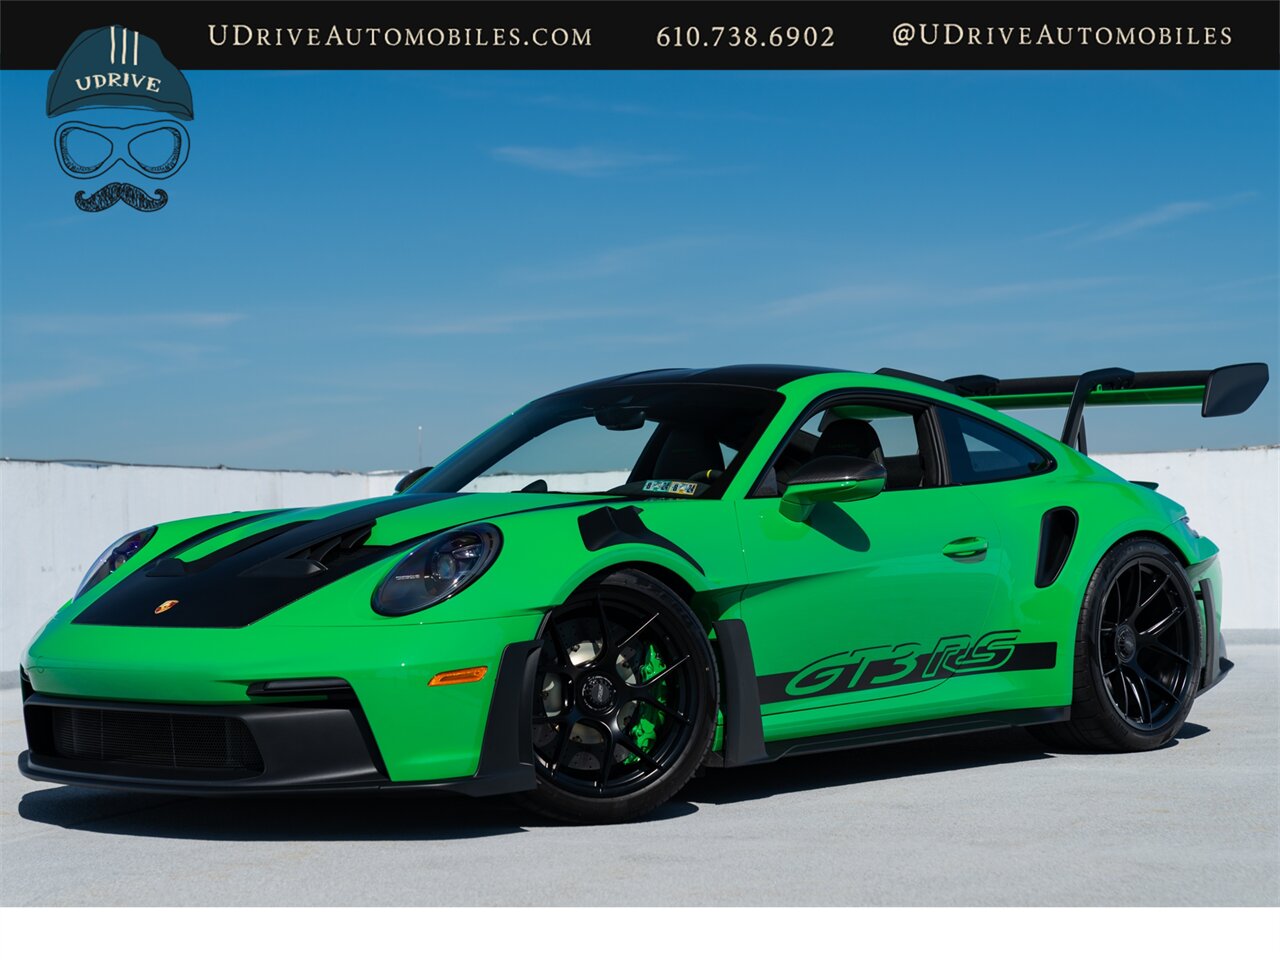 2023 Porsche 911 GT3 RS  Weissach Pkg FAL Full Body PPF $43k in Extras - Photo 1 - West Chester, PA 19382